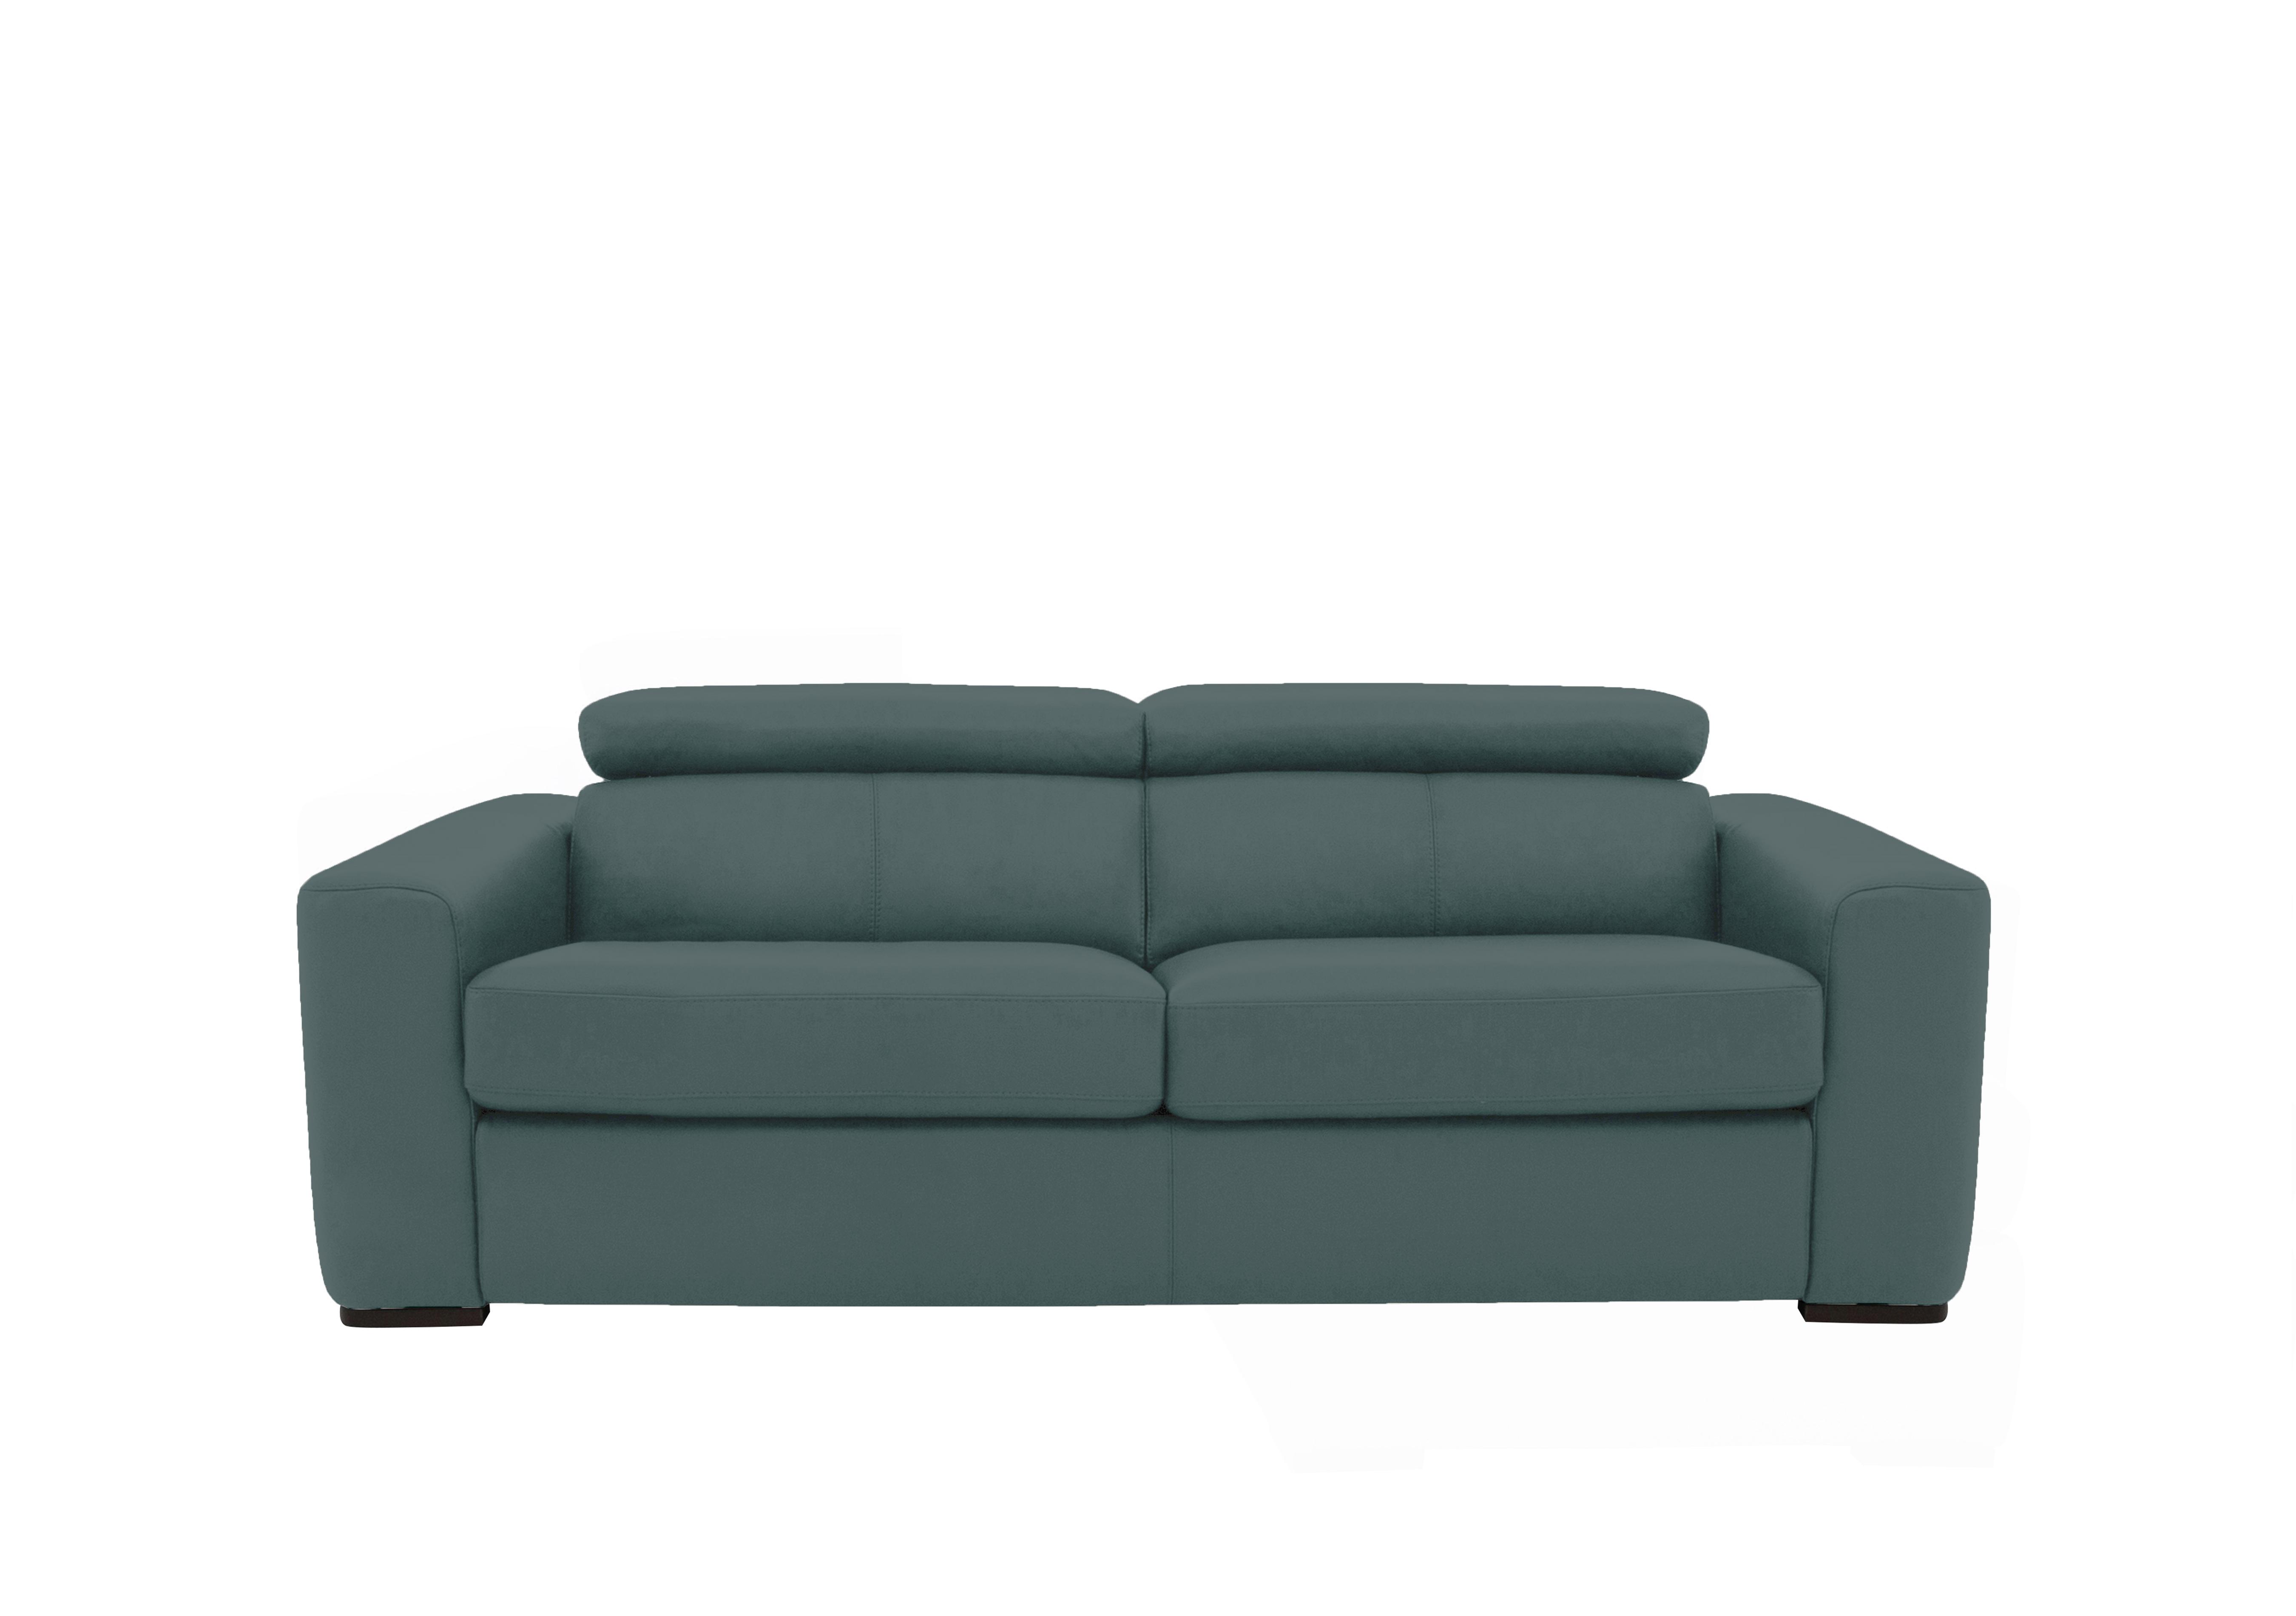 Infinity 3 Seater Leather Sofa Bed in Bv-301e Lake Green on Furniture Village